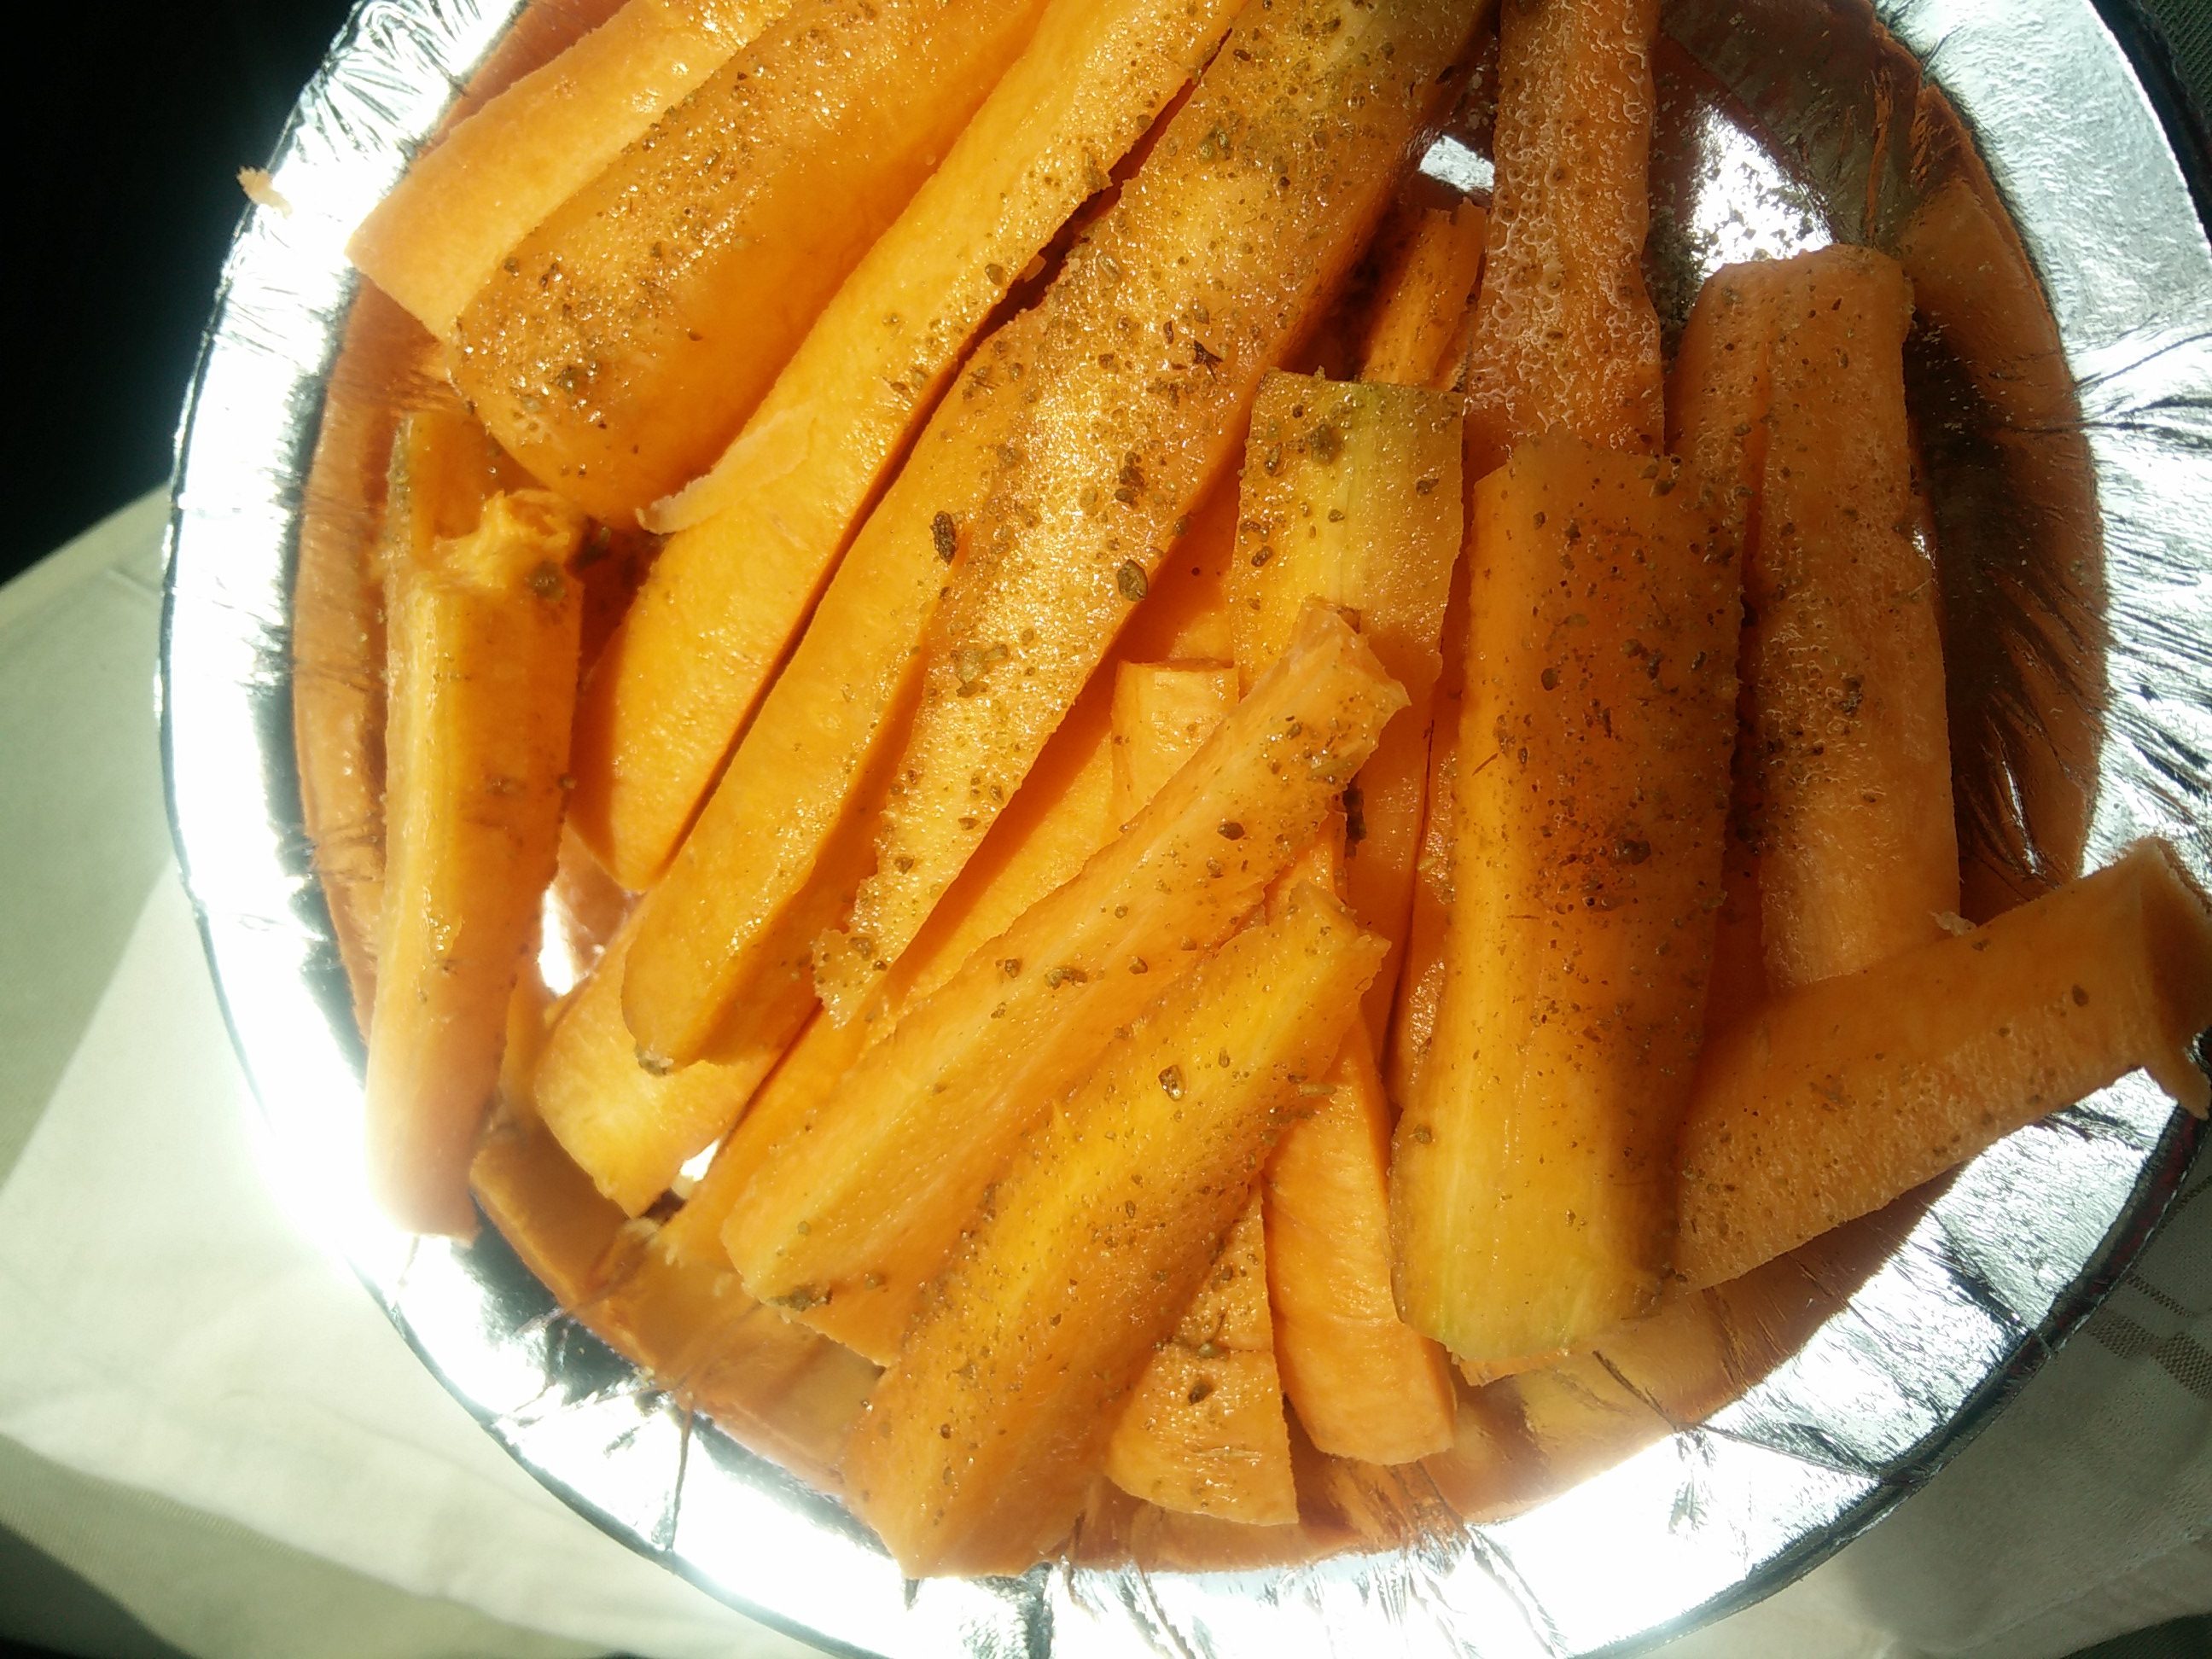 A plate of carrots